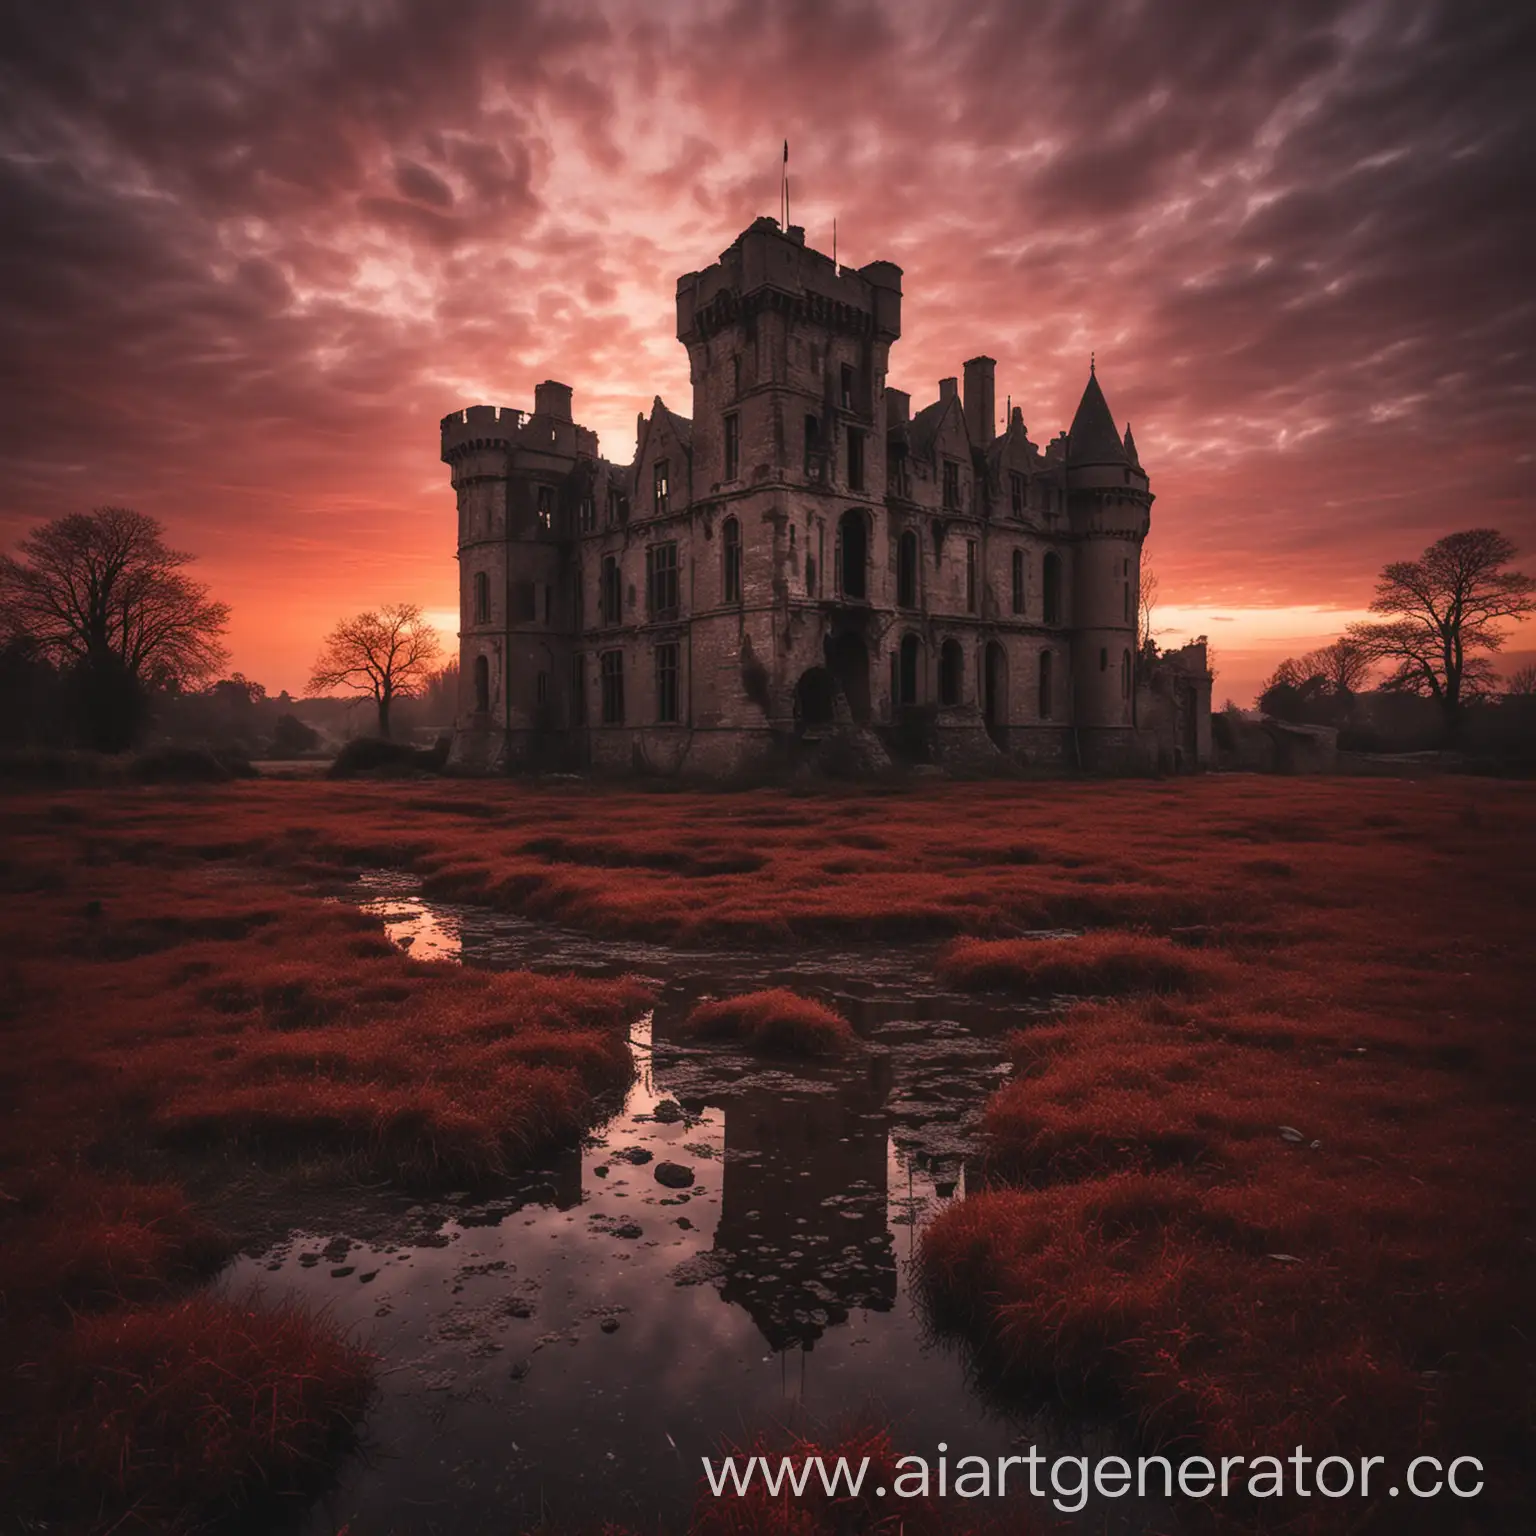 Eerie-Evening-at-an-Old-Abandoned-Castle-in-England-with-Bloody-Red-Sunset